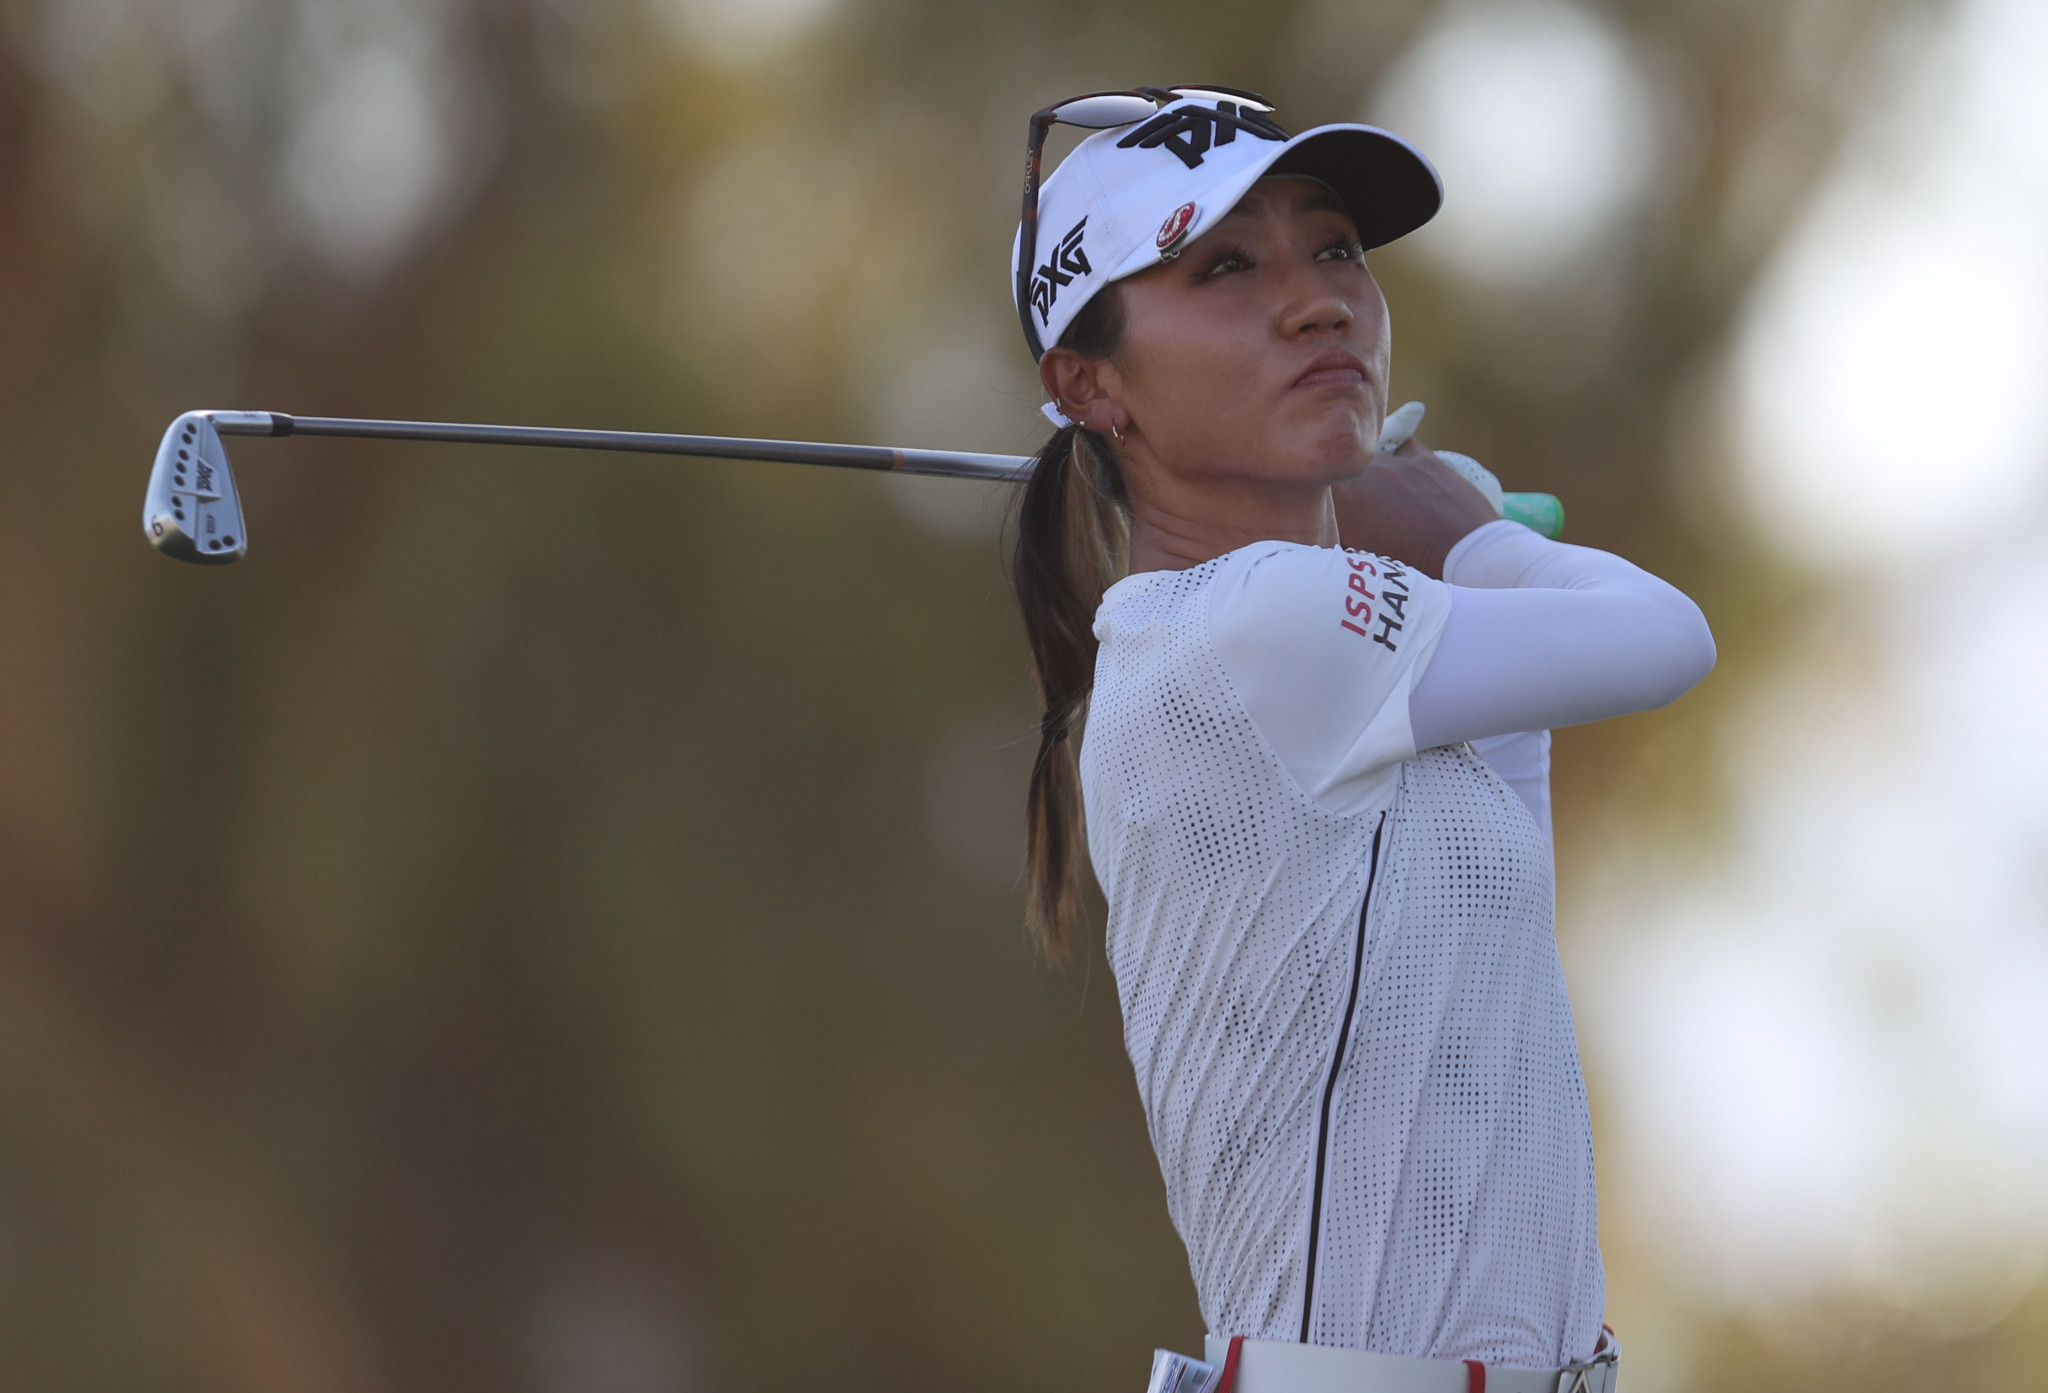 Lydia Ko produced a stunning final round but fell short of overhauling Patty Tavatanakit ©Getty Images